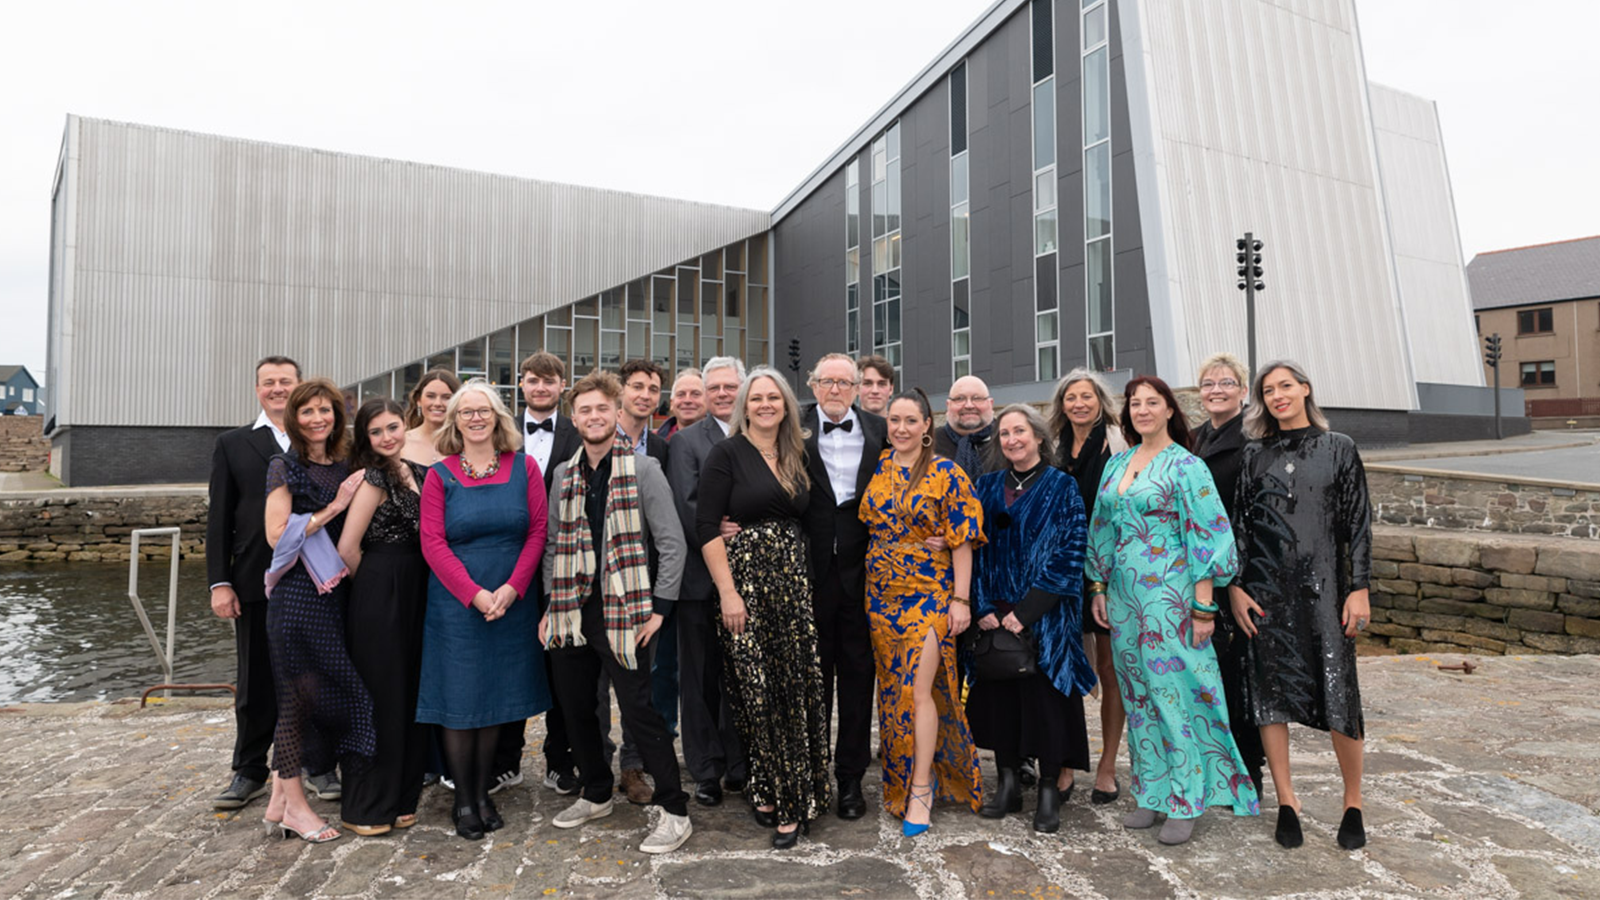 Photographer Alistair Morrison and guests for the World Premiere of Time to Pause, infront of Mareel - Austin Taylor Photography